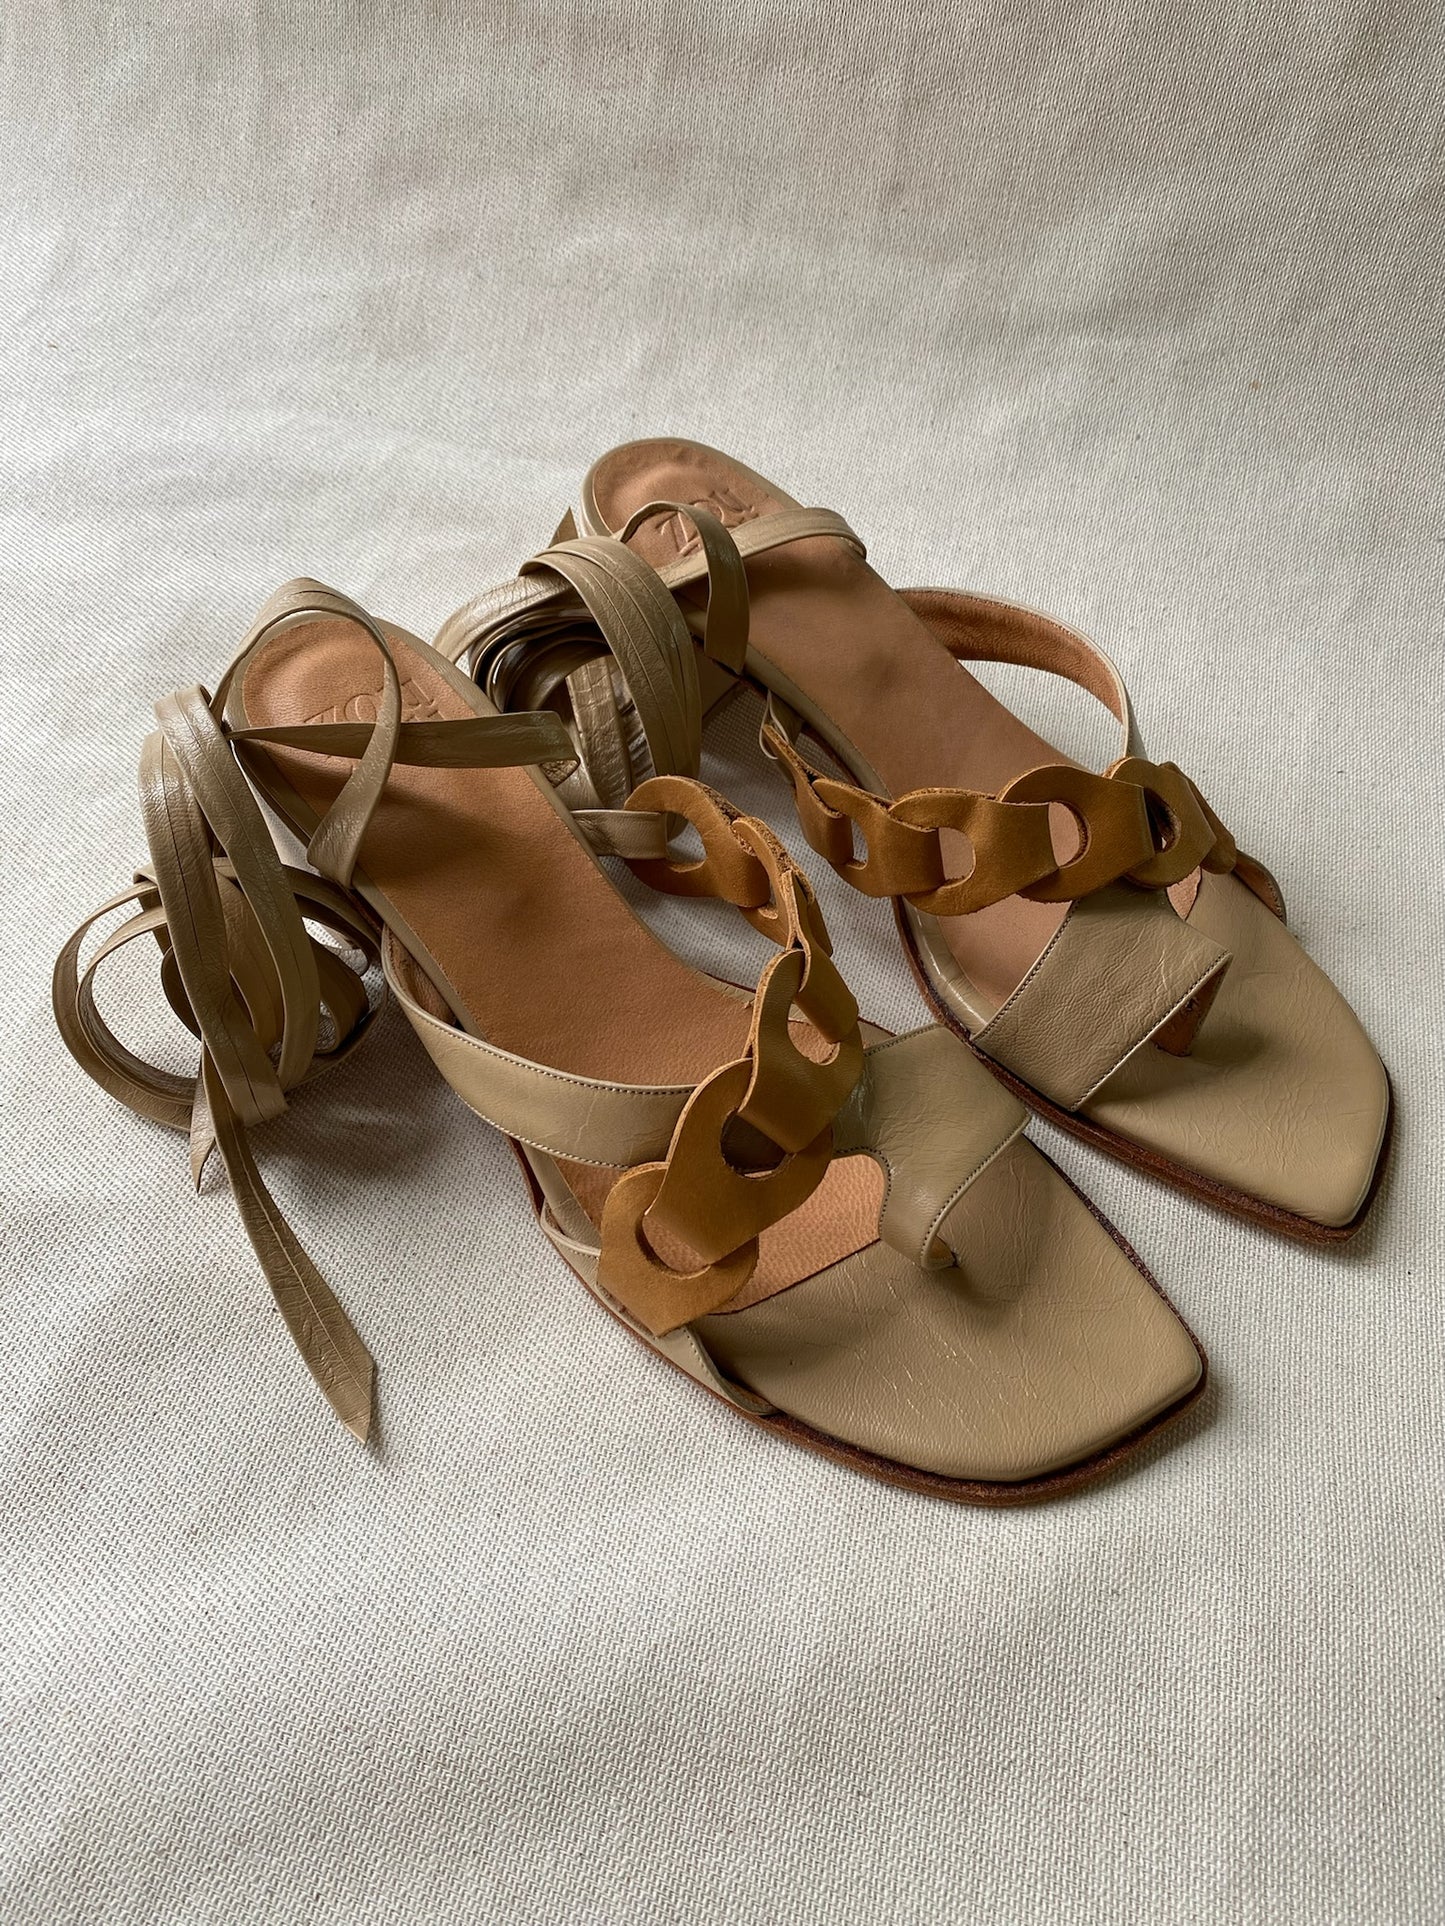 Vita Tie Up Sandal in Cacao Size 40